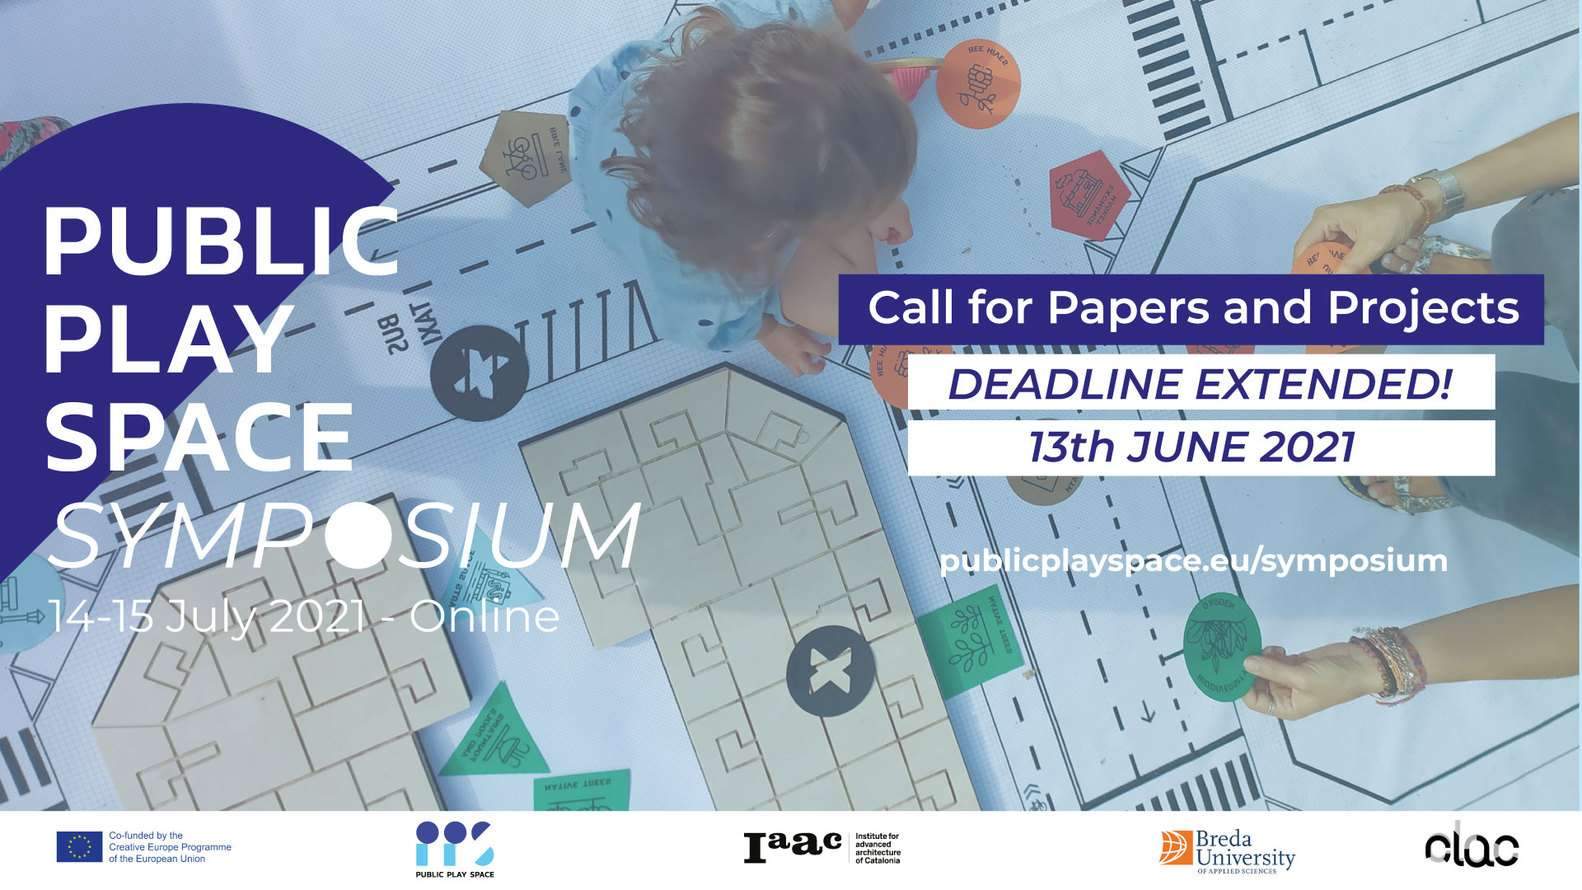 EXTENDED DEADLINE - CALL FOR PAPERS // PUBLIC PLAY SPACE SYMPOSIUM